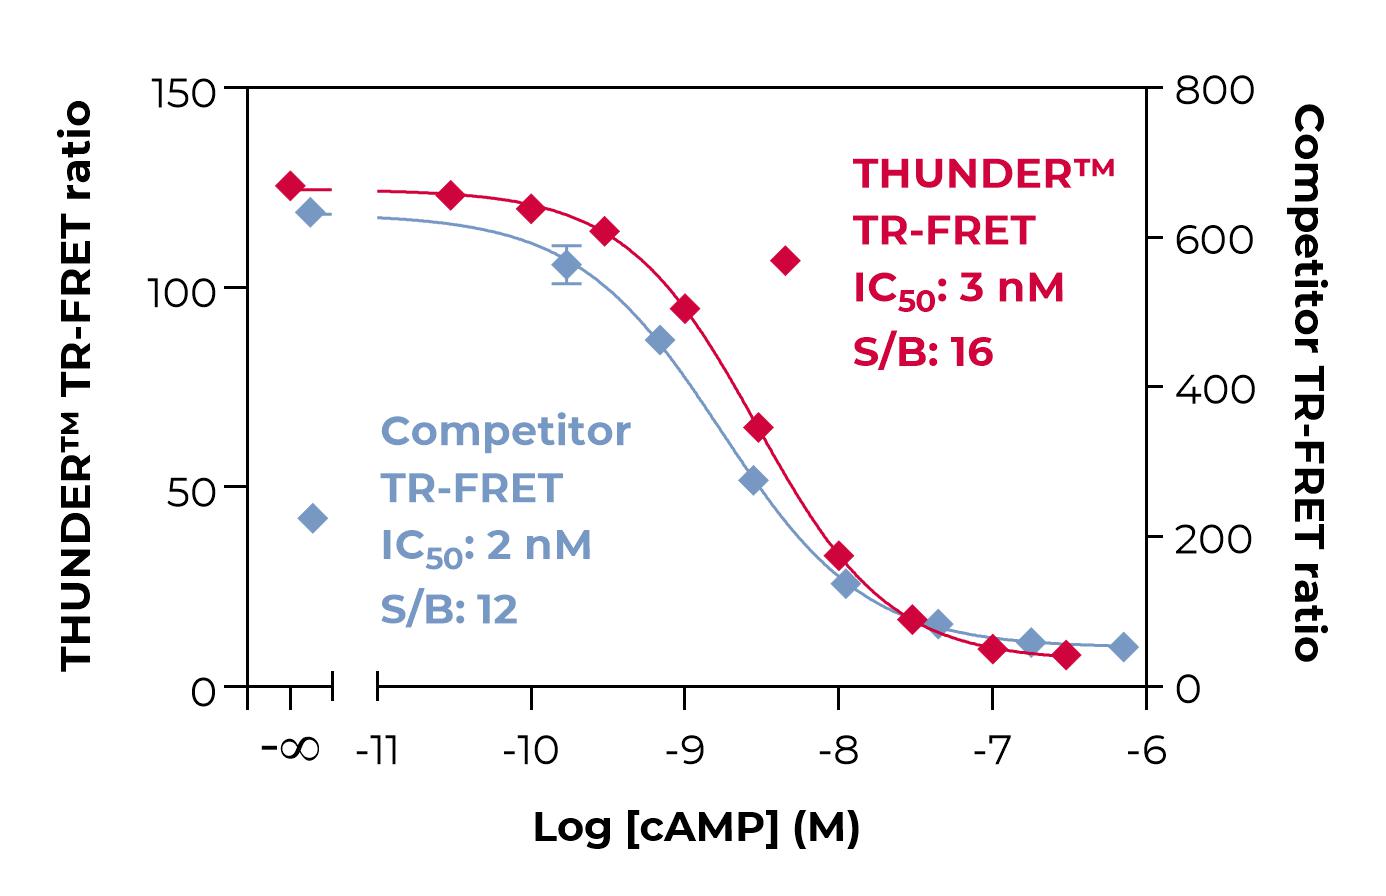 THUNDER vs Competitor-cAMP standard curve